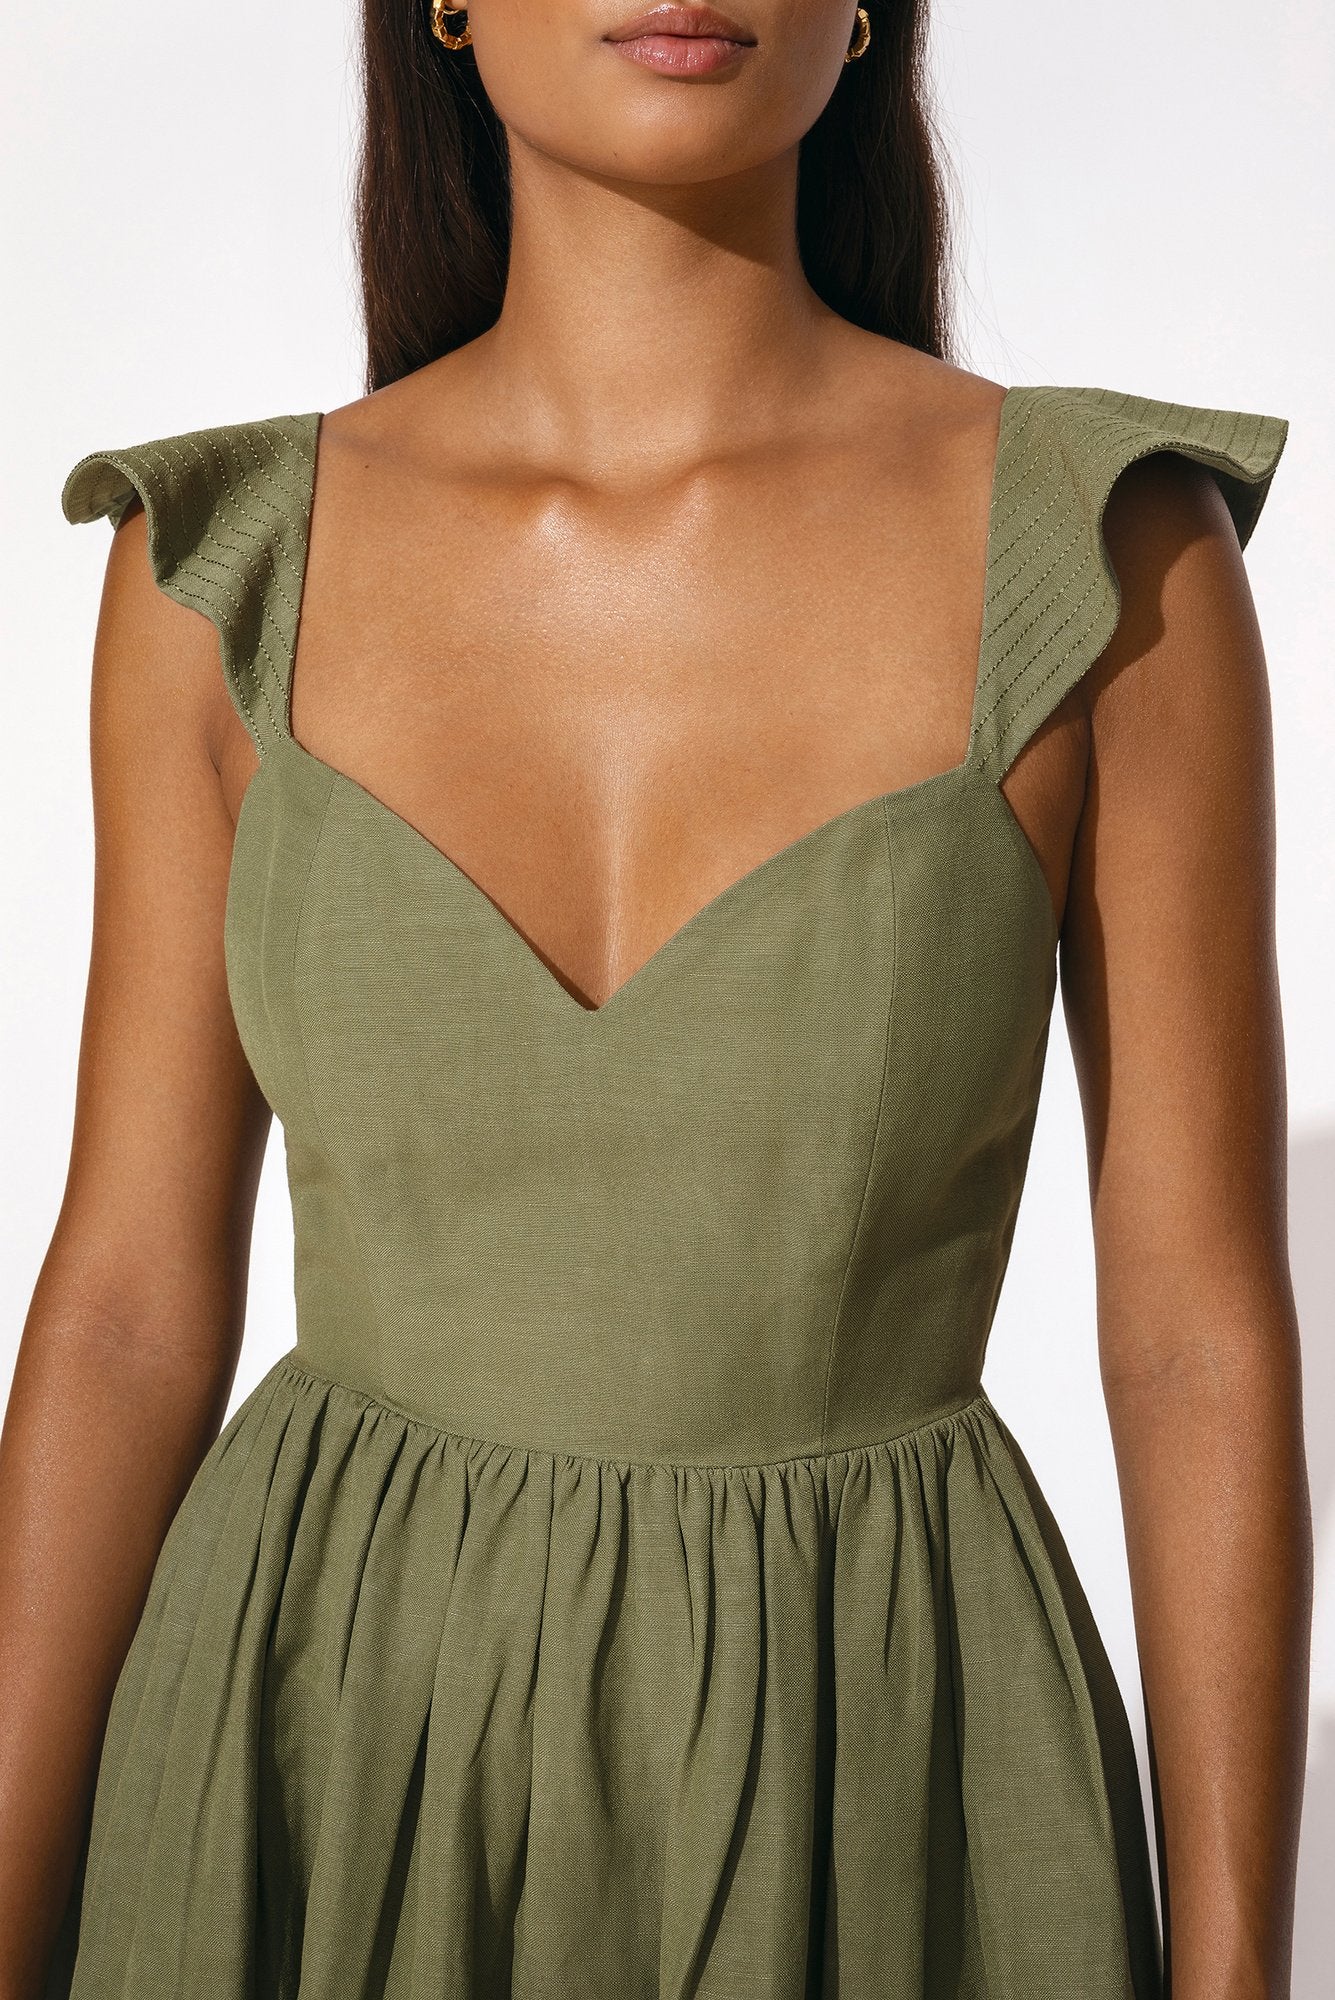 BY MALINA Emery Dress In Olive